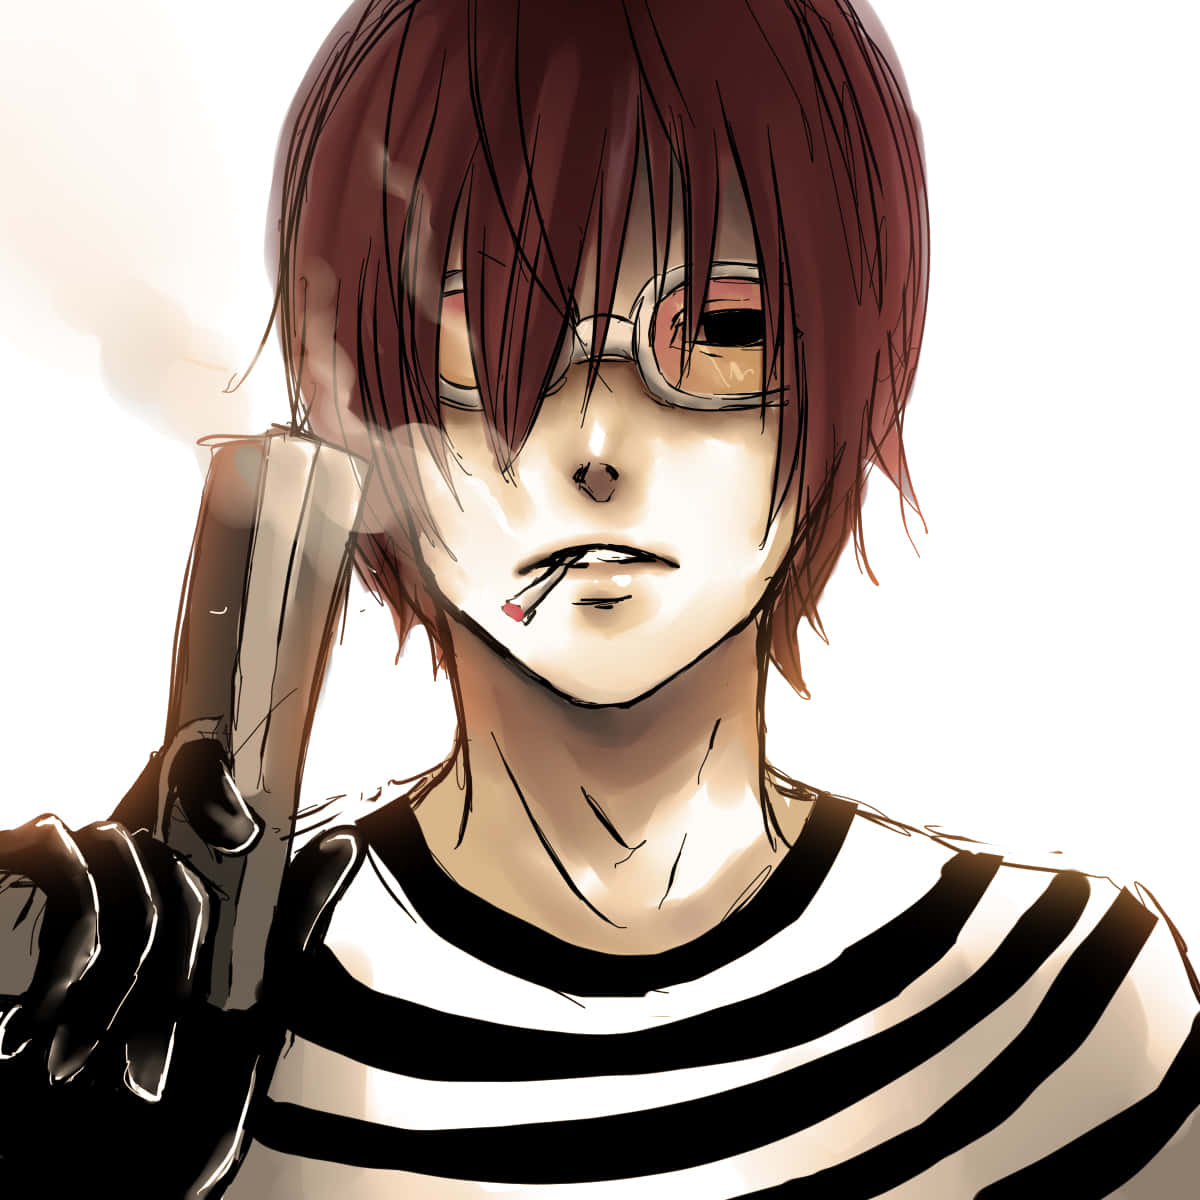 Matt from Death Note posing with a cigarette Wallpaper